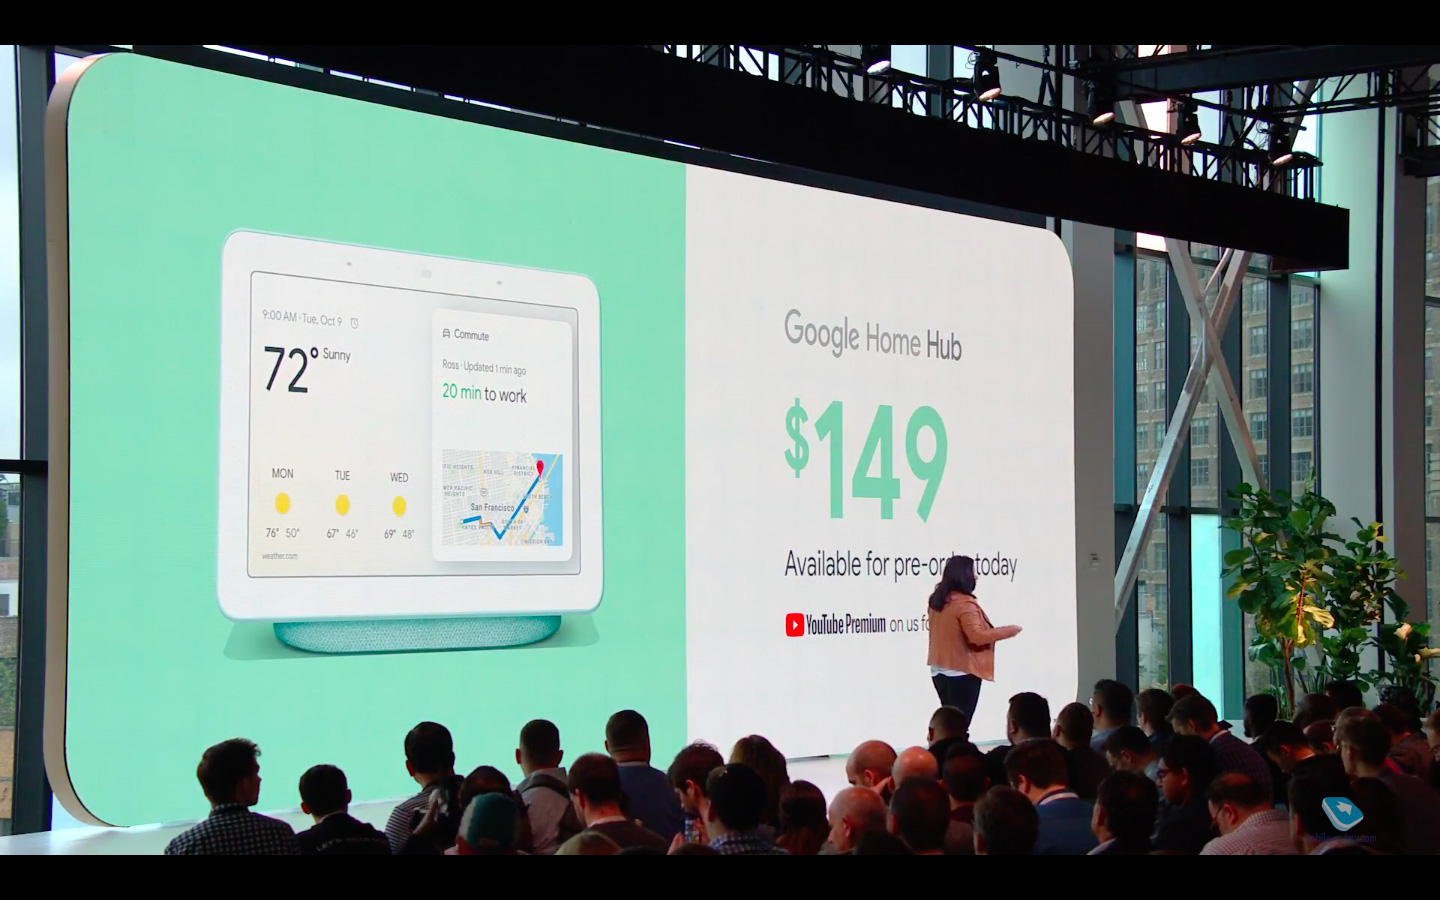 Did Google show something interesting in their presentation?